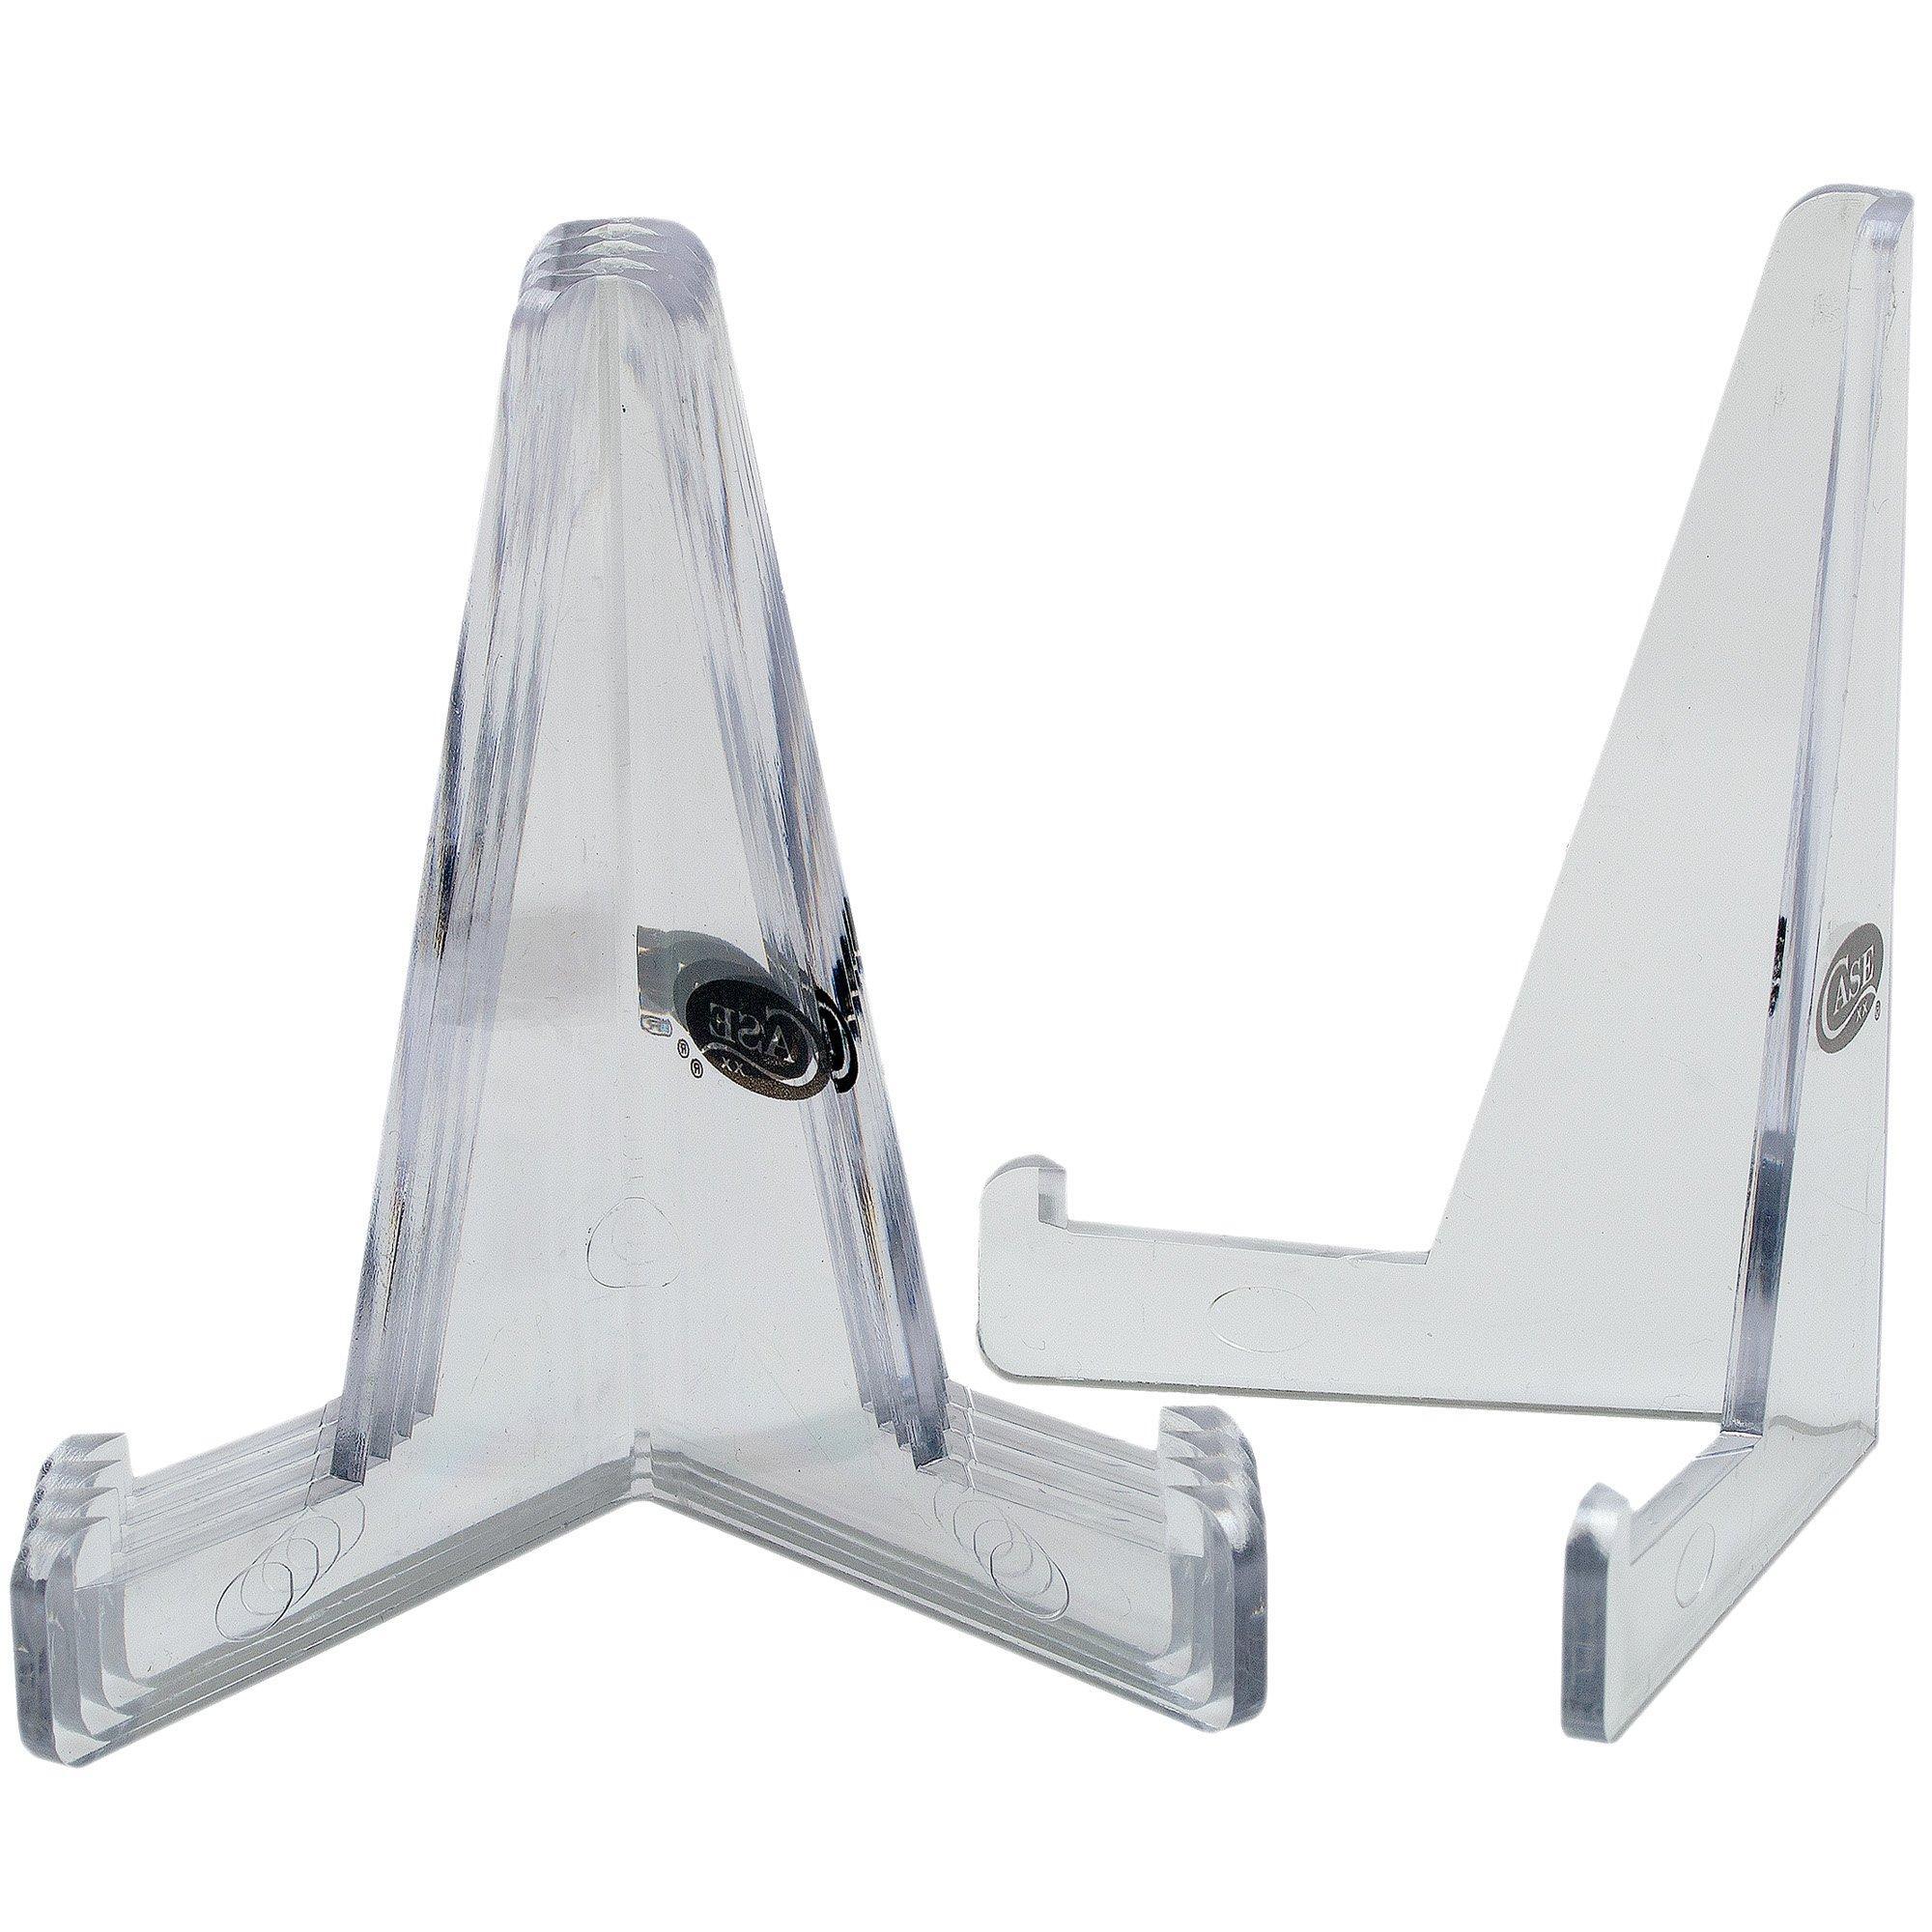 Case Knives Case Knives Acrylic Knife Stand Large 09064 5x messenstandaard